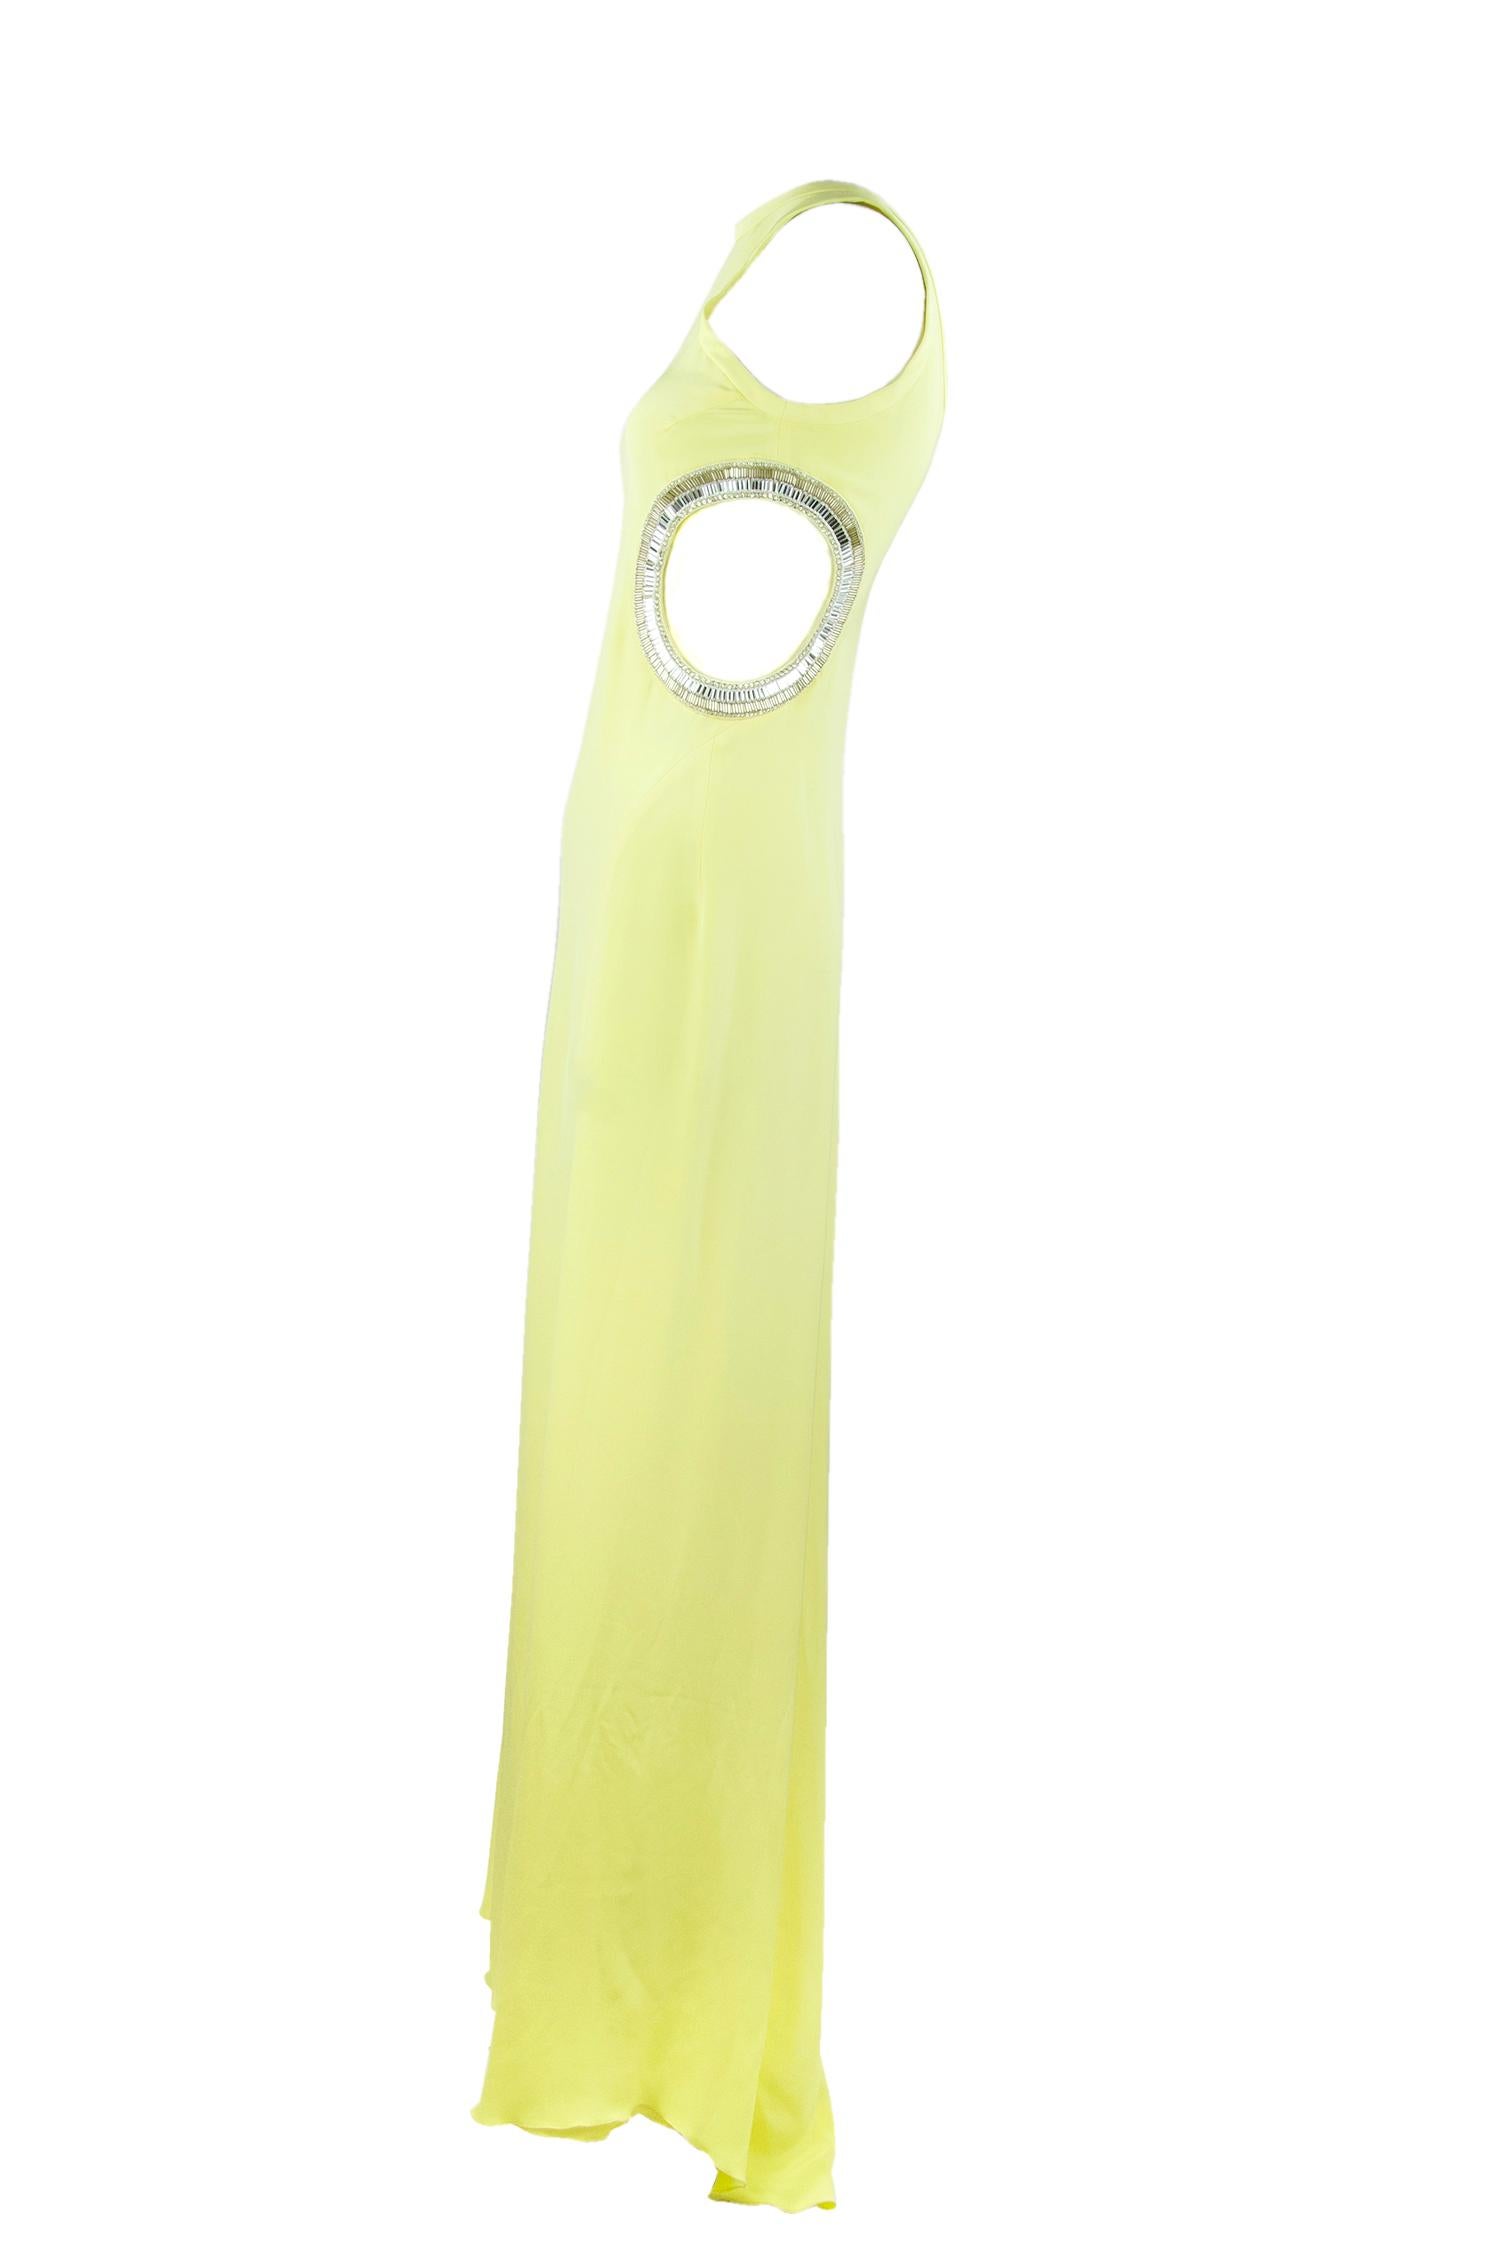 Shine at your next black tie event in this exquisite light yellow Pucci gown.  Incredibly elegant and sexy, this gown features cutouts and crystal embellishments.  Made out of a luxurious light yellow silk.  

Size: IT 40

Condition: Pristine, like